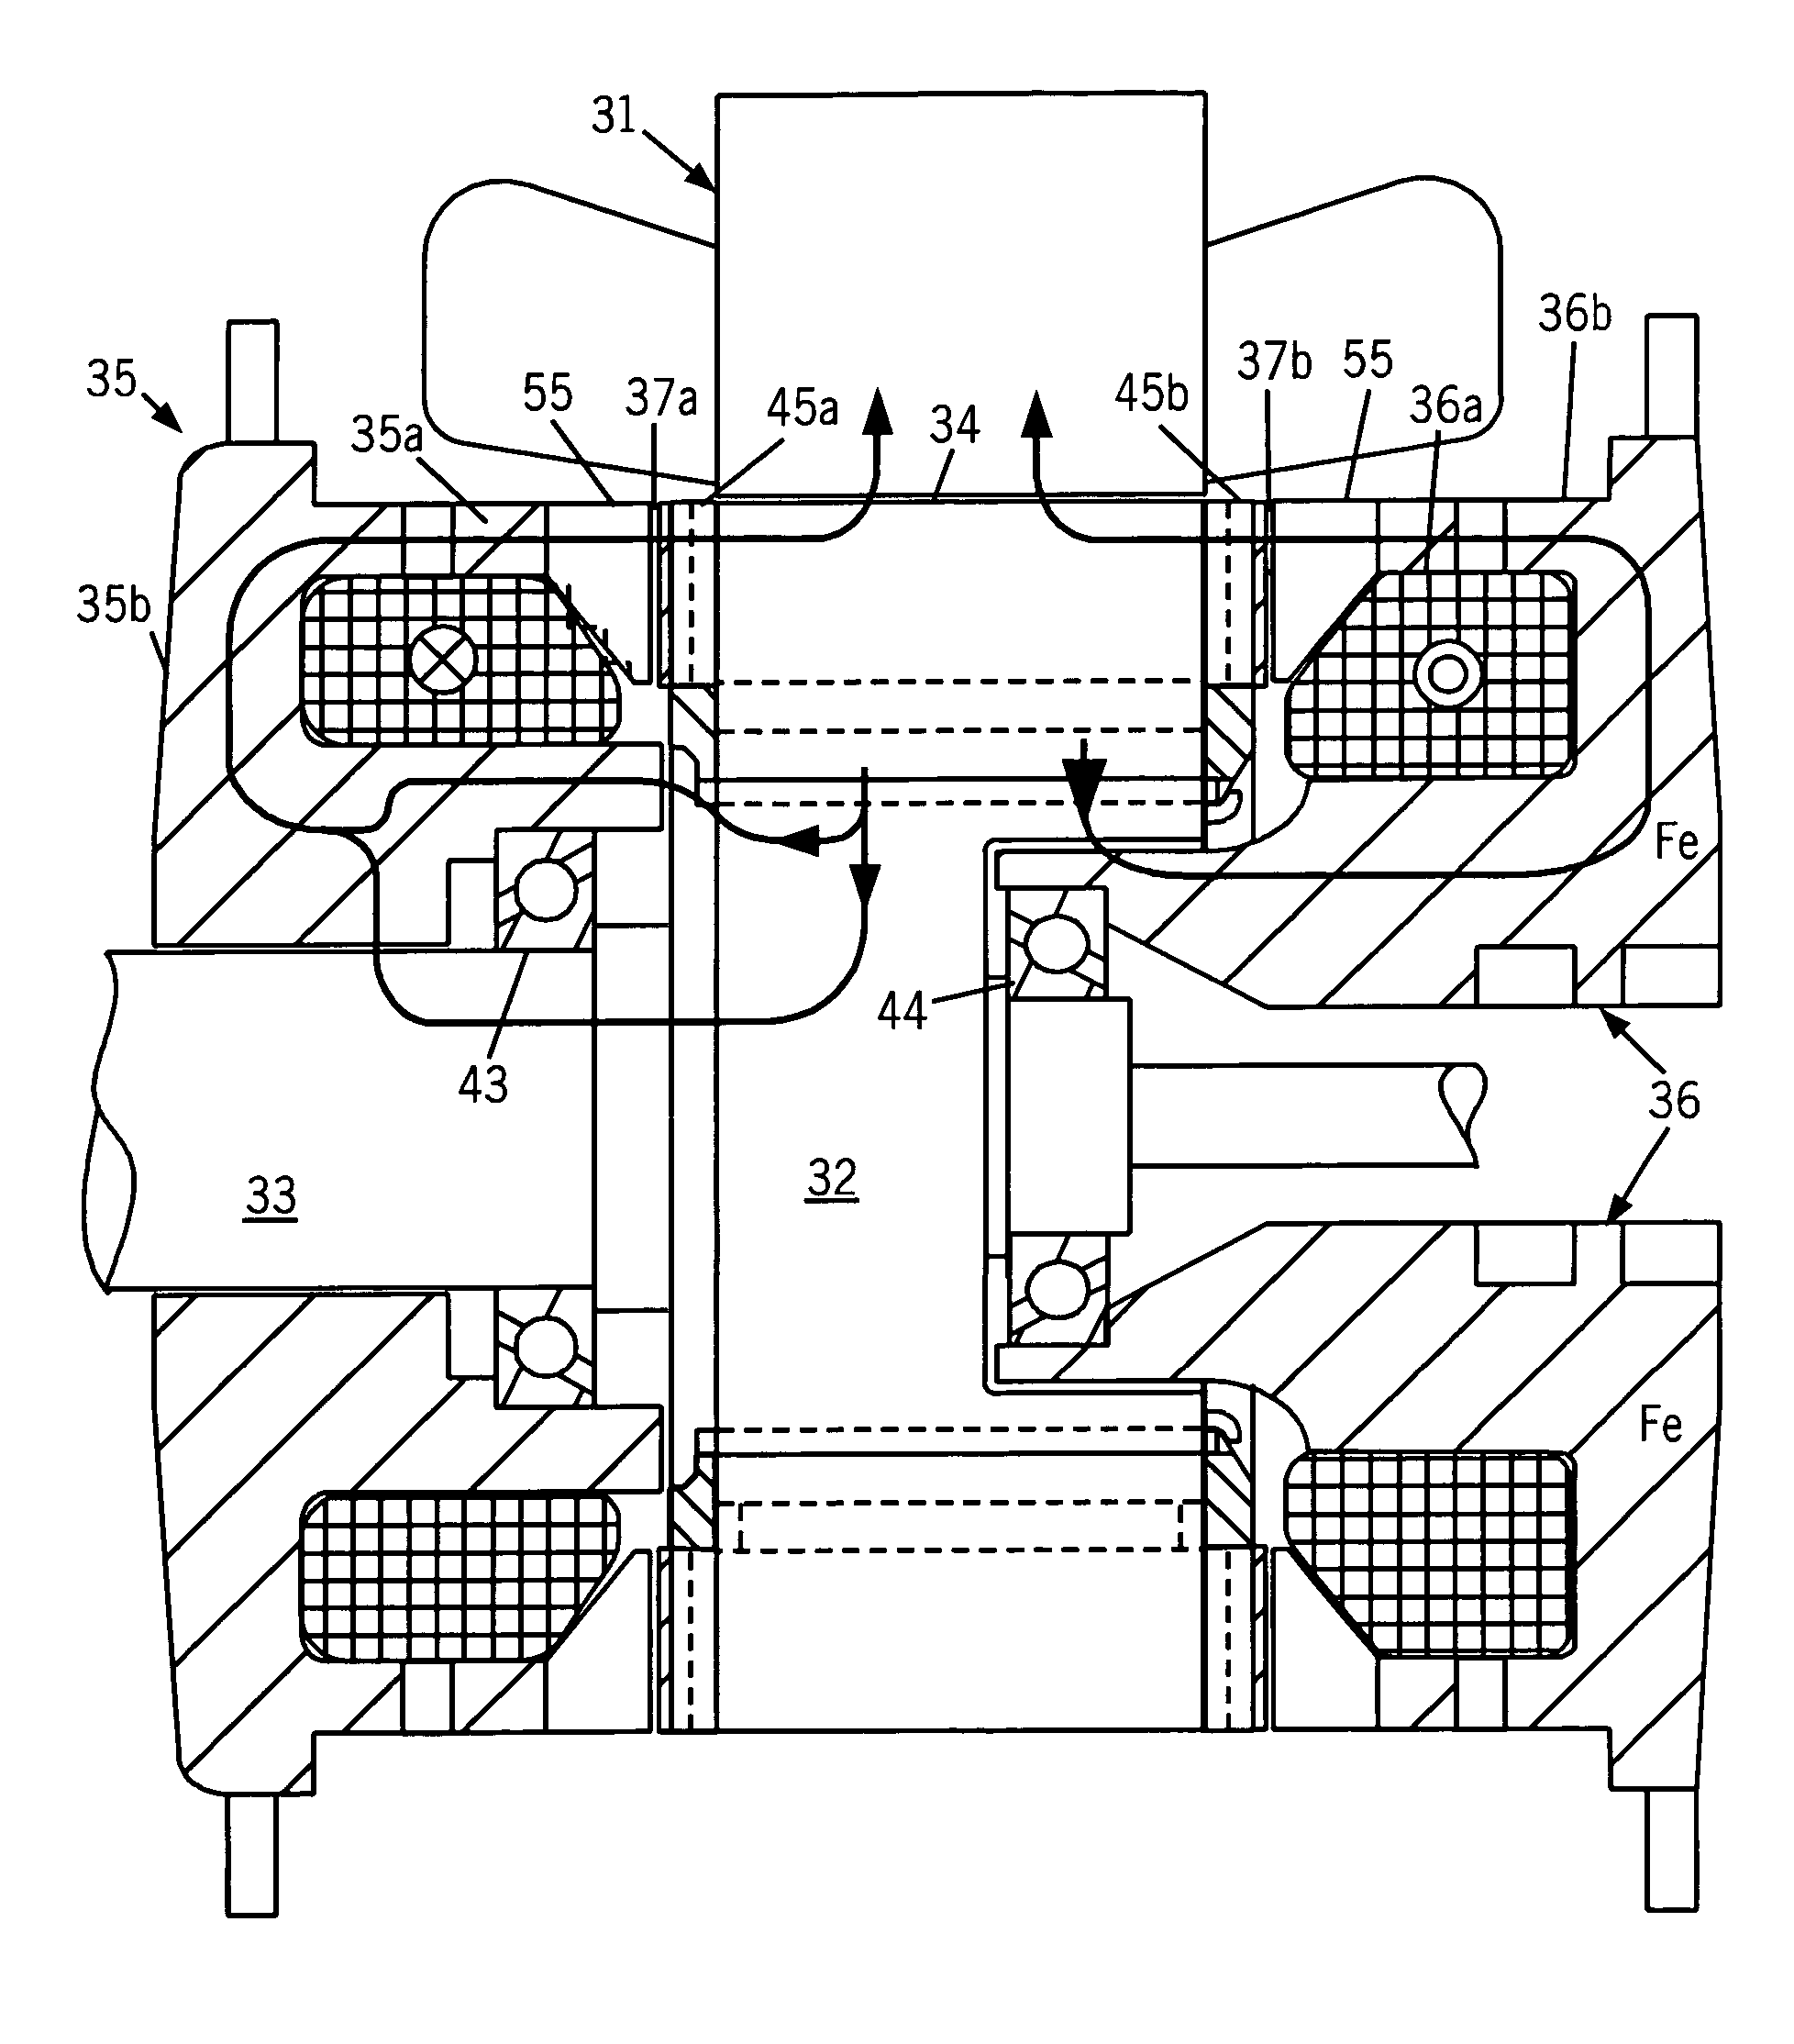 Rotor apparatus for high strength undiffused brushless electric machine